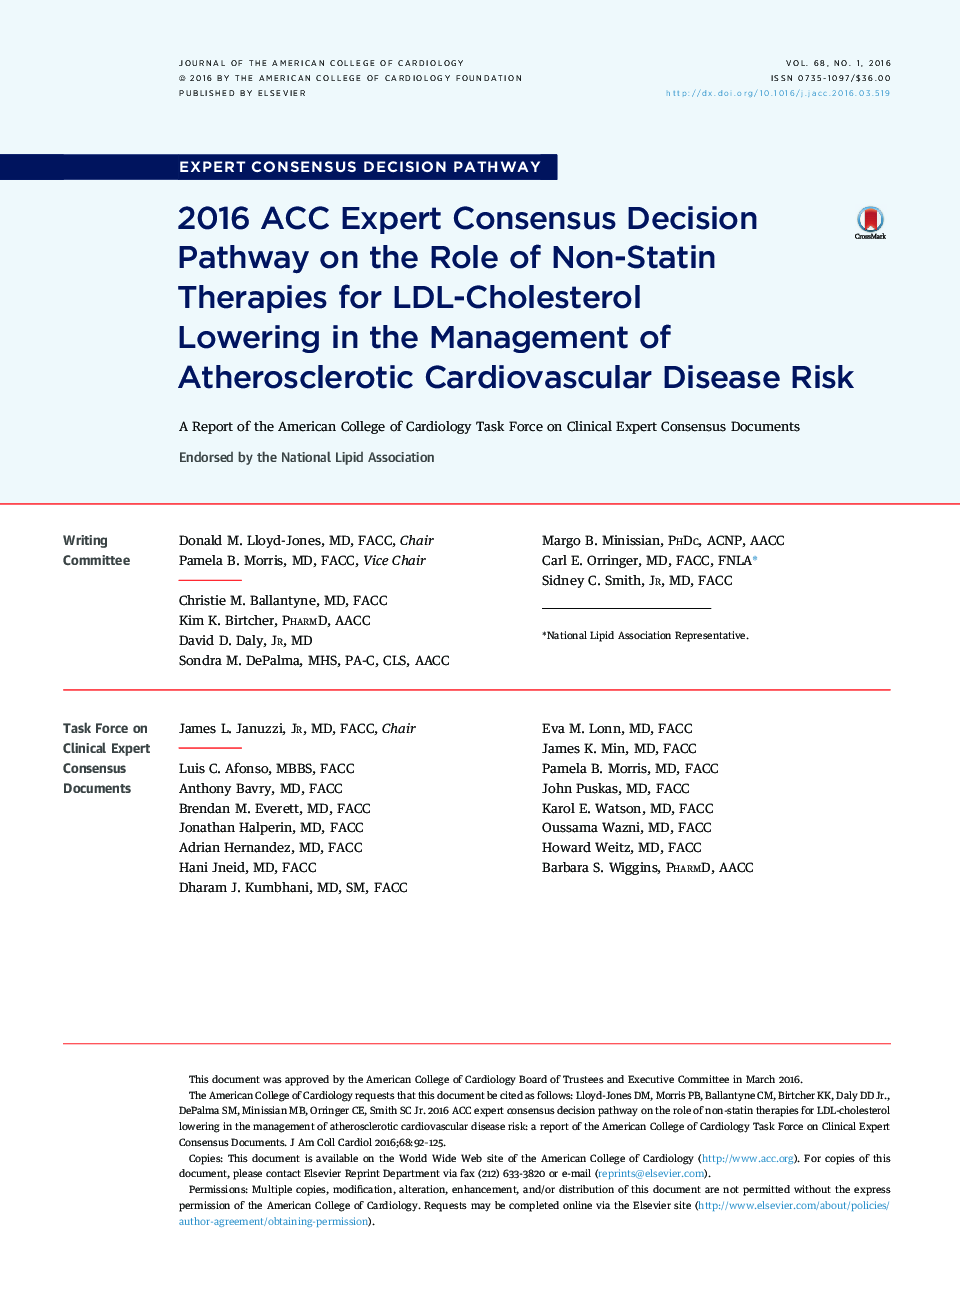 2016 ACC Expert Consensus Decision Pathway on the Role of Non-Statin Therapies for LDL-Cholesterol Lowering in the Management of Atherosclerotic Cardiovascular Disease Risk